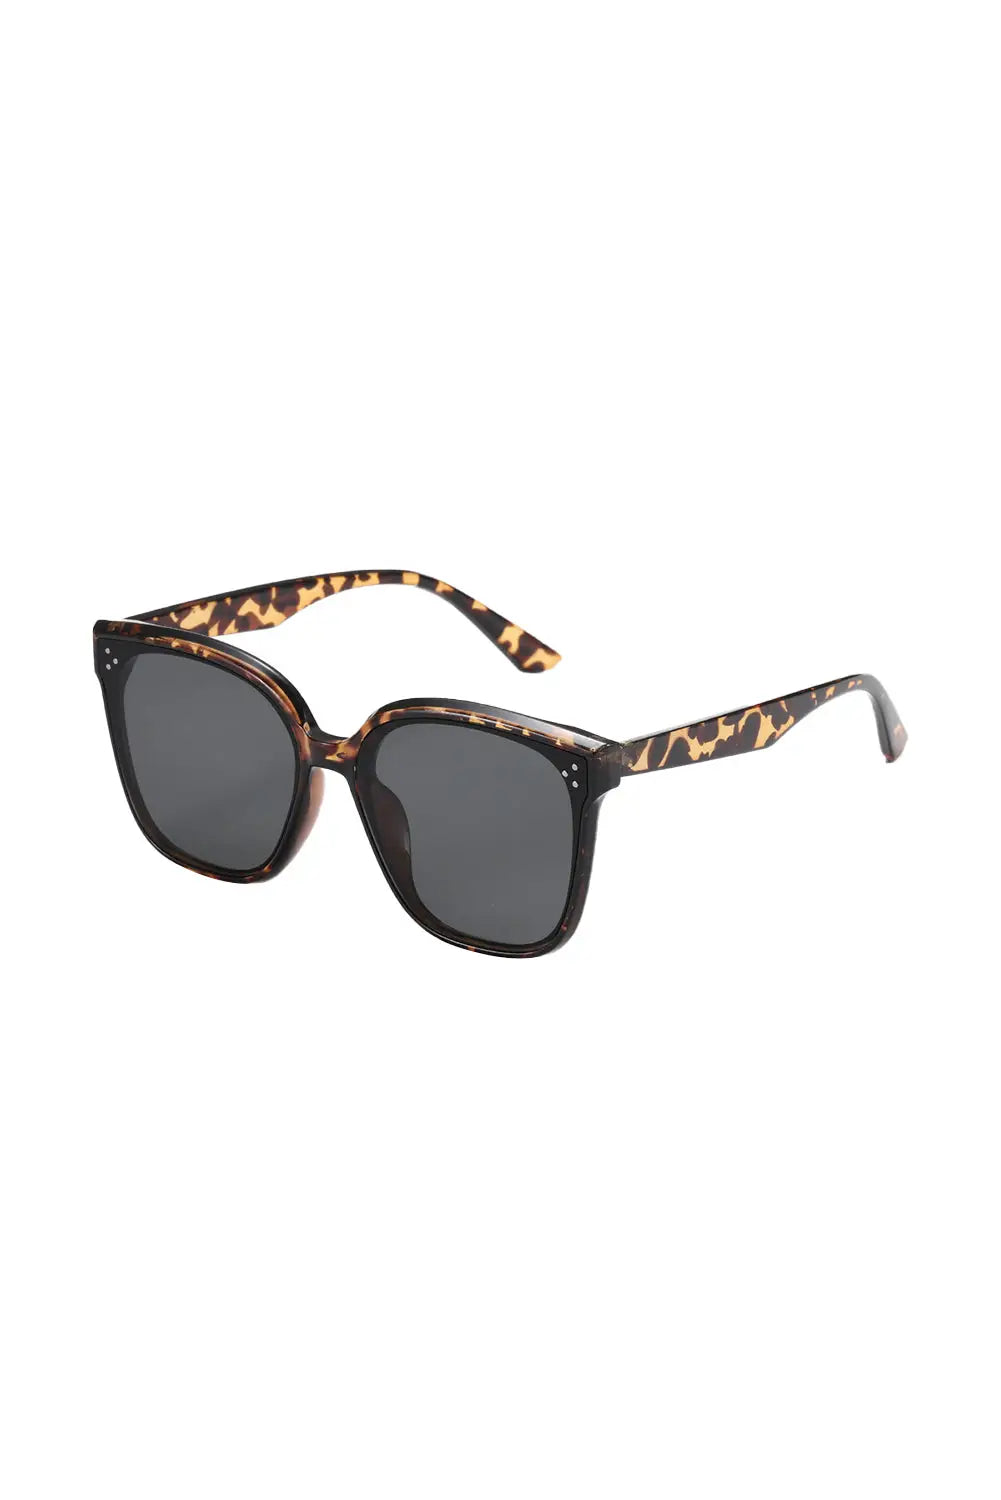 Leopard square frame vintage sunglasses - one size / 100%abs